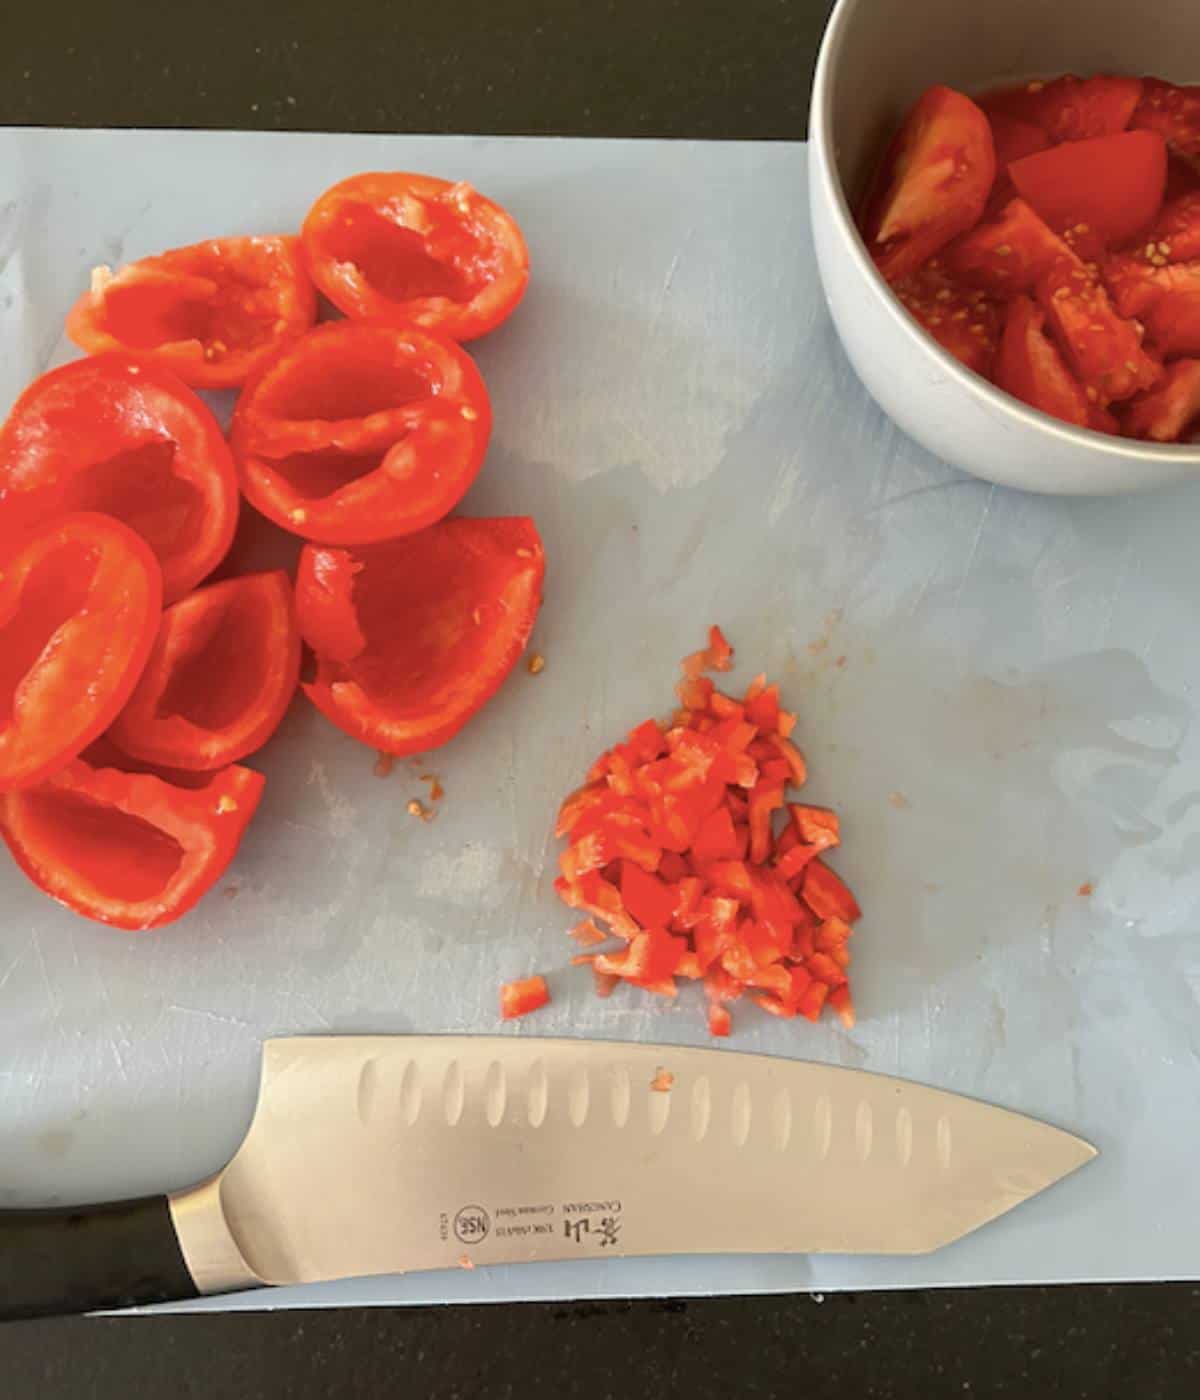 Tomatoes with seeds removed then diced.